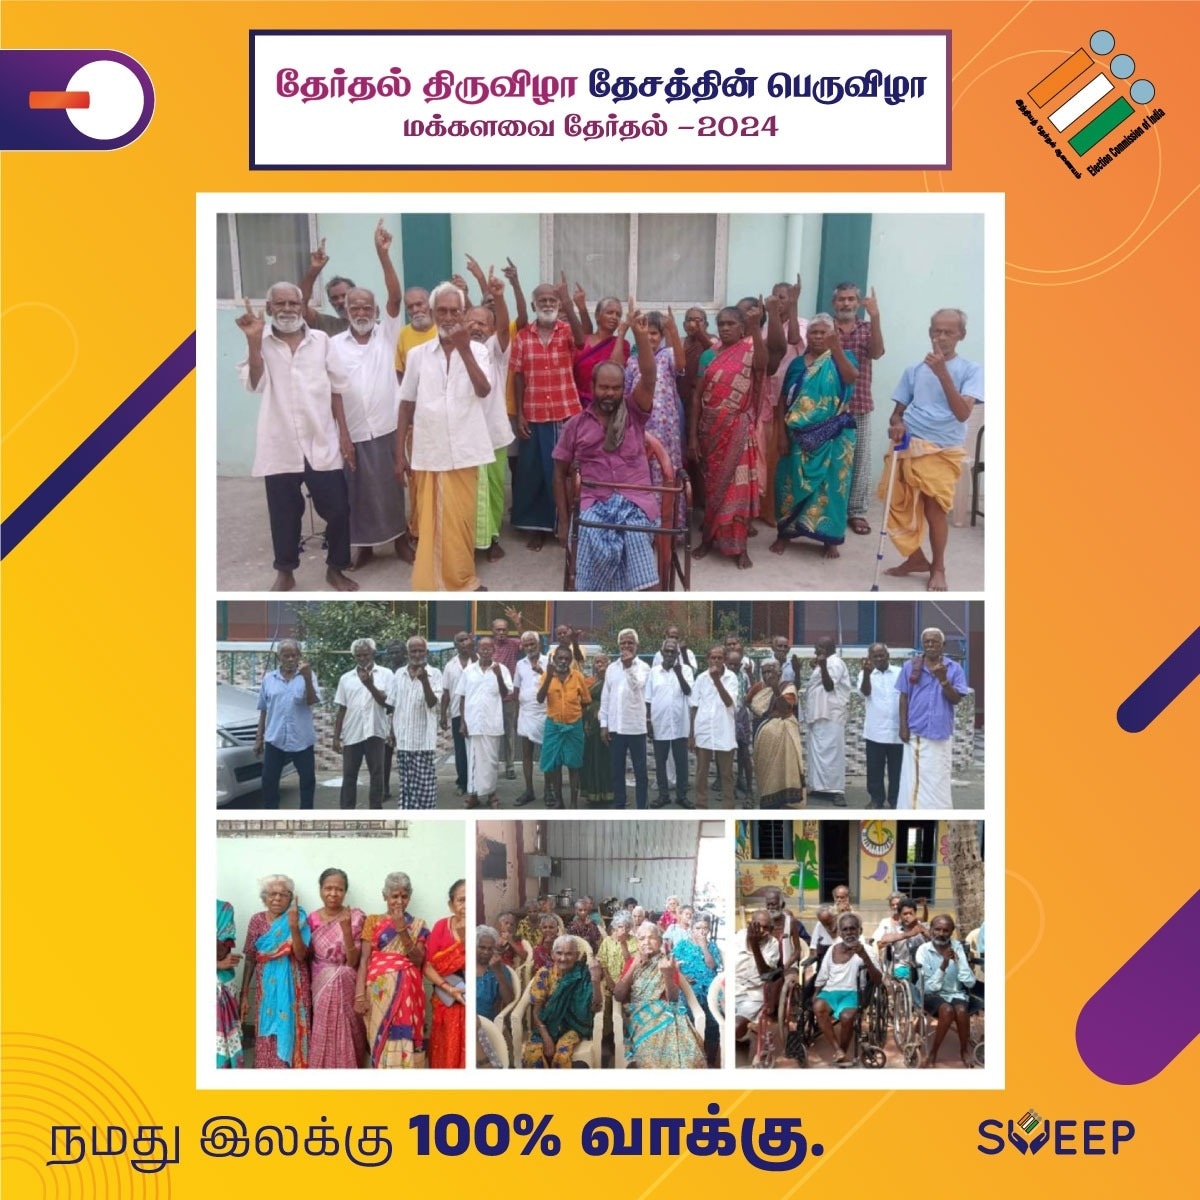 99 people residing in various old ages homes homes have voted today in Coimbatore District #Loksabha2024 #ChunavKaParv #DeshKaGarv #ECI #GeneralElections2024 #Elections2024 #LS2024 #AssemblyElections2024 #TamilnaduElections2024 #NoVoterToBeLeftBehind #IVoted4Sure #GoVote